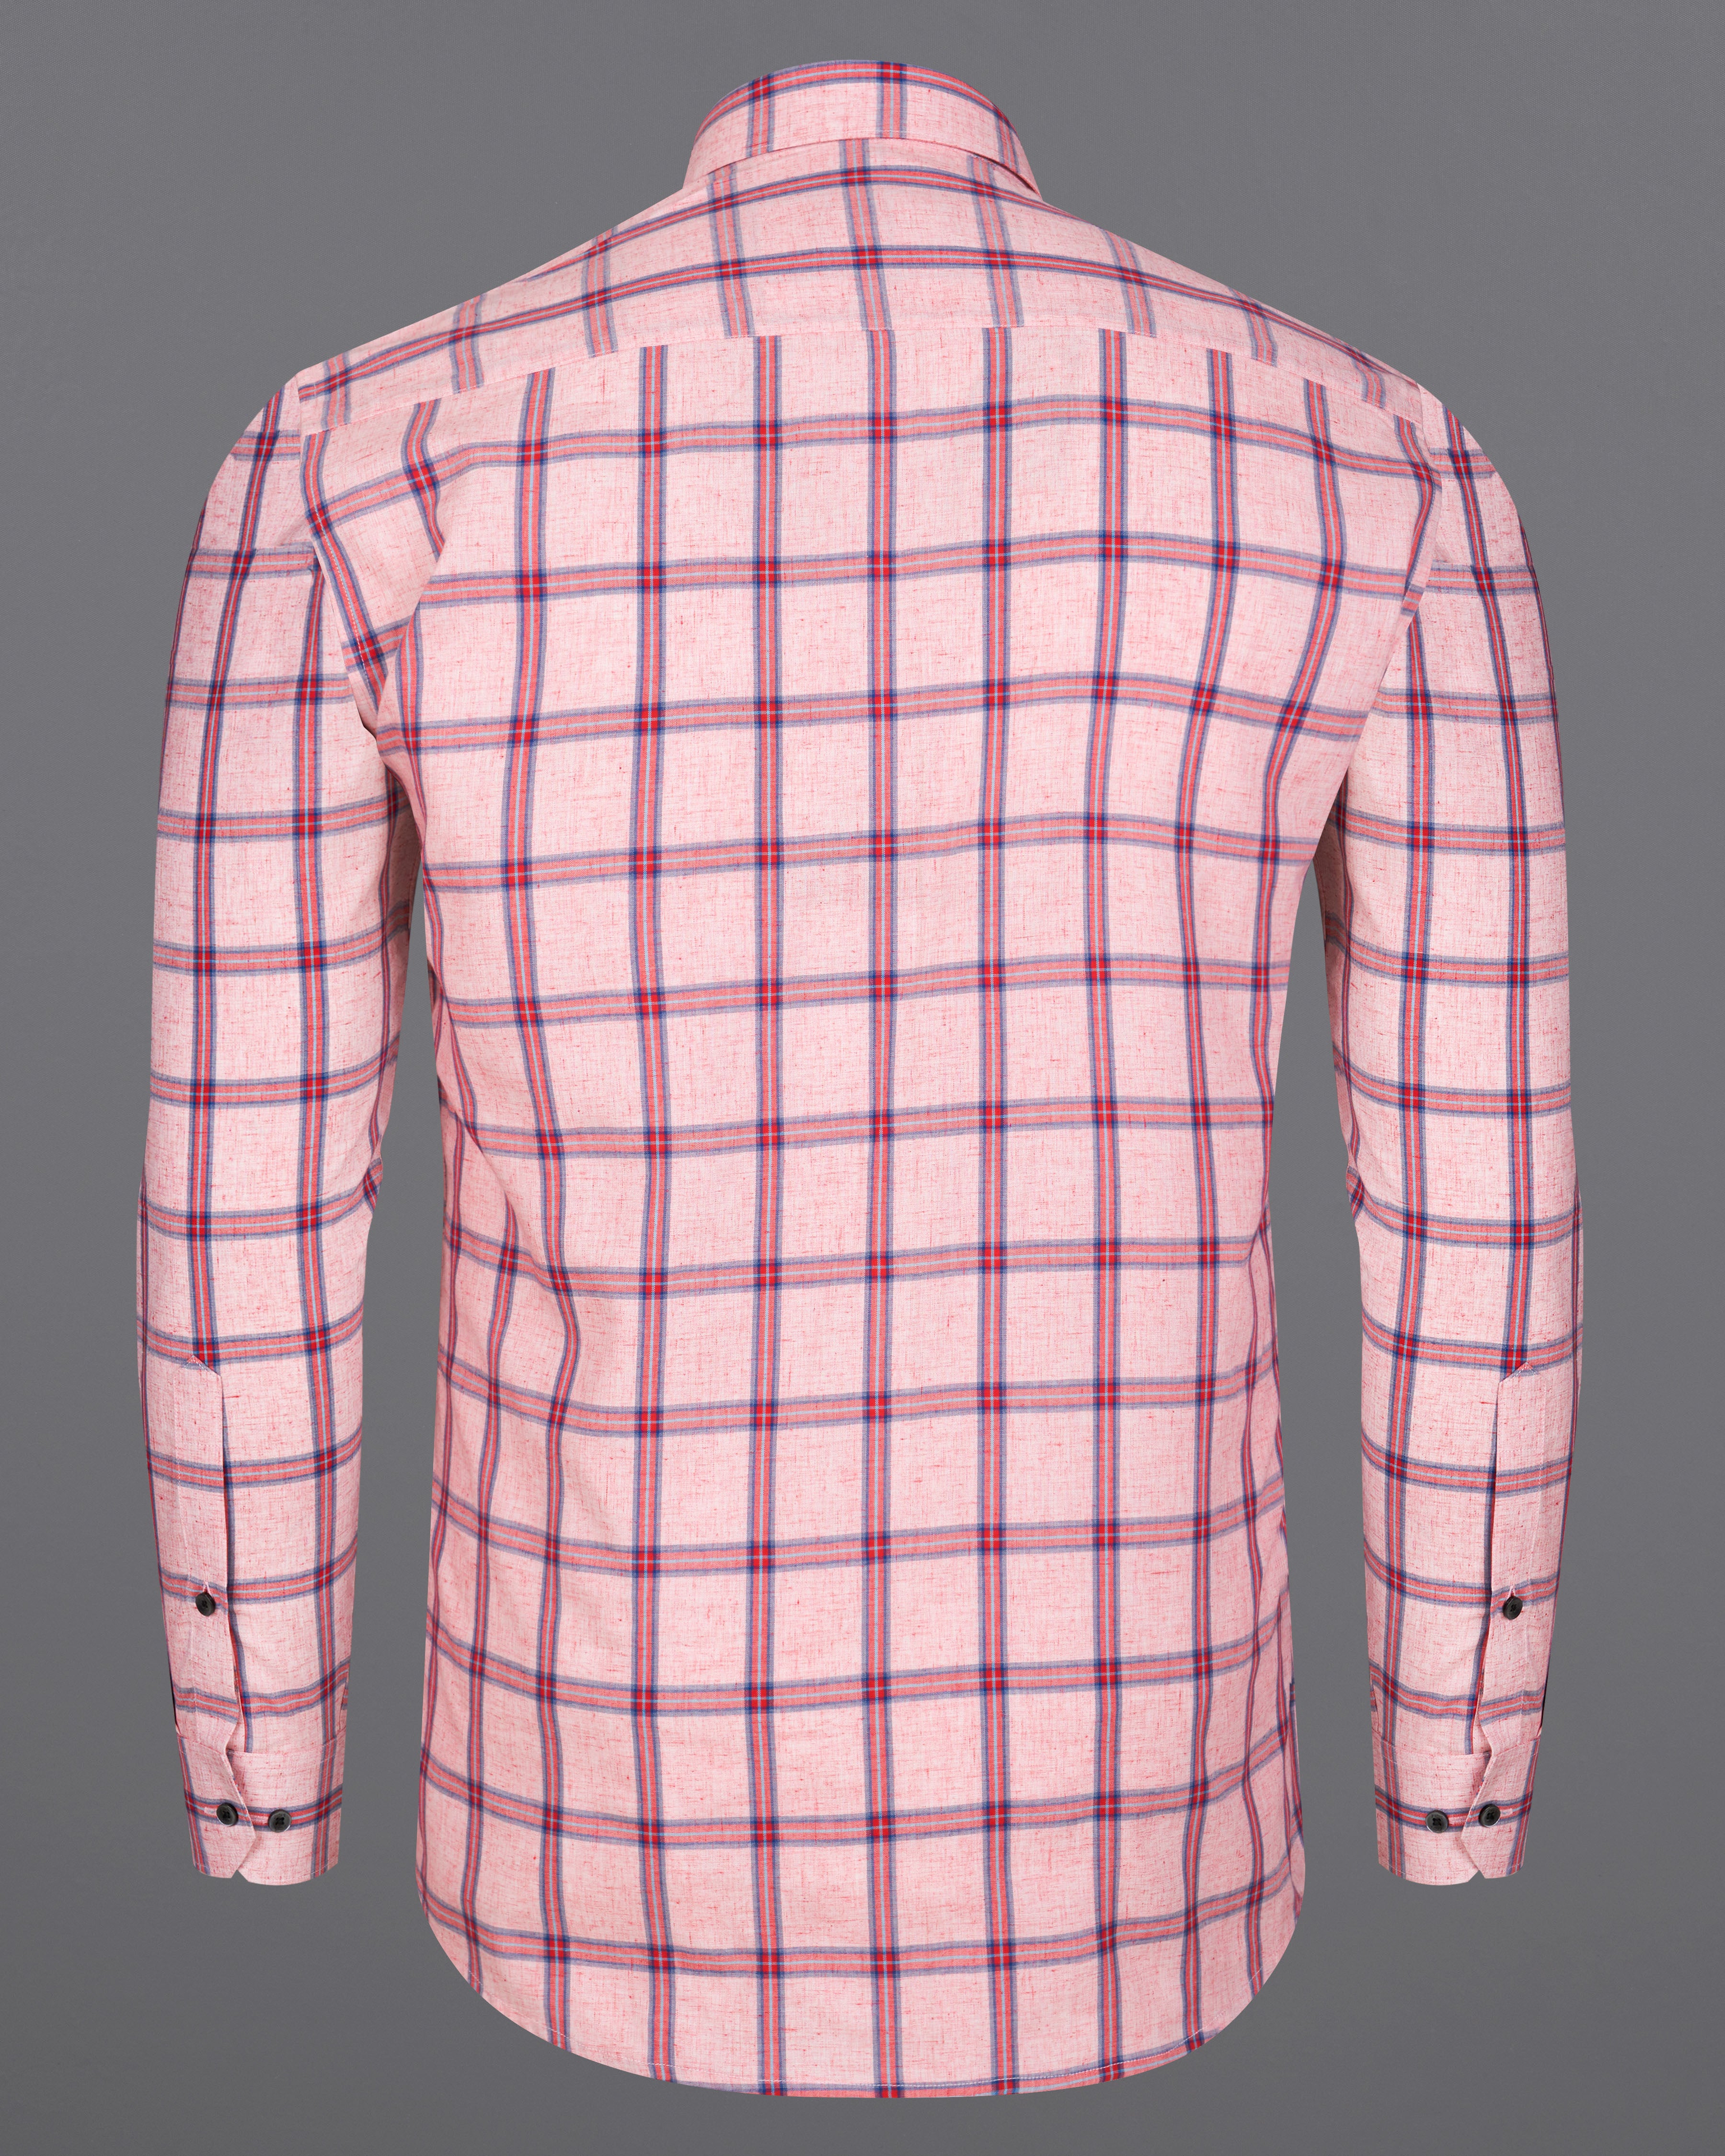 Oyster Pink with Cornell Pink Windowpane Premium Cotton Shirt 9051-BLK-38, 9051-BLK-H-38, 9051-BLK-39, 9051-BLK-H-39, 9051-BLK-40, 9051-BLK-H-40, 9051-BLK-42, 9051-BLK-H-42, 9051-BLK-44, 9051-BLK-H-44, 9051-BLK-46, 9051-BLK-H-46, 9051-BLK-48, 9051-BLK-H-48, 9051-BLK-50, 9051-BLK-H-50, 9051-BLK-52, 9051-BLK-H-52